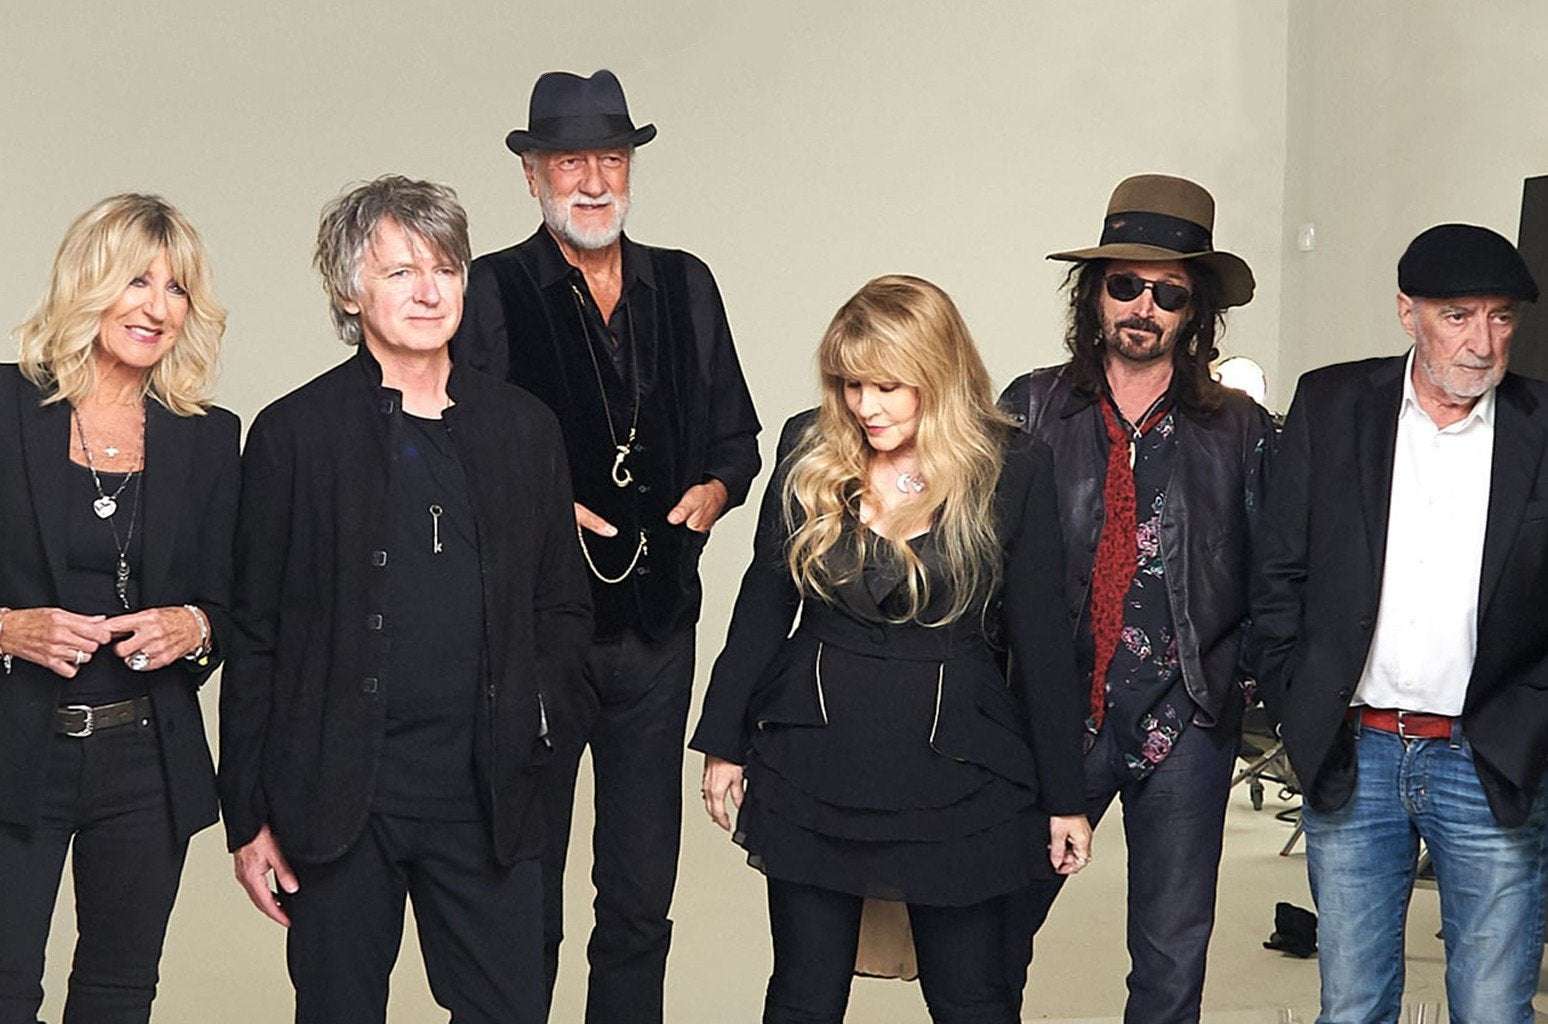 image for Fleetwood Mac's 'Dreams' Charts on Hot 100 For First Time since 1977, Thanks to TikTok Revival